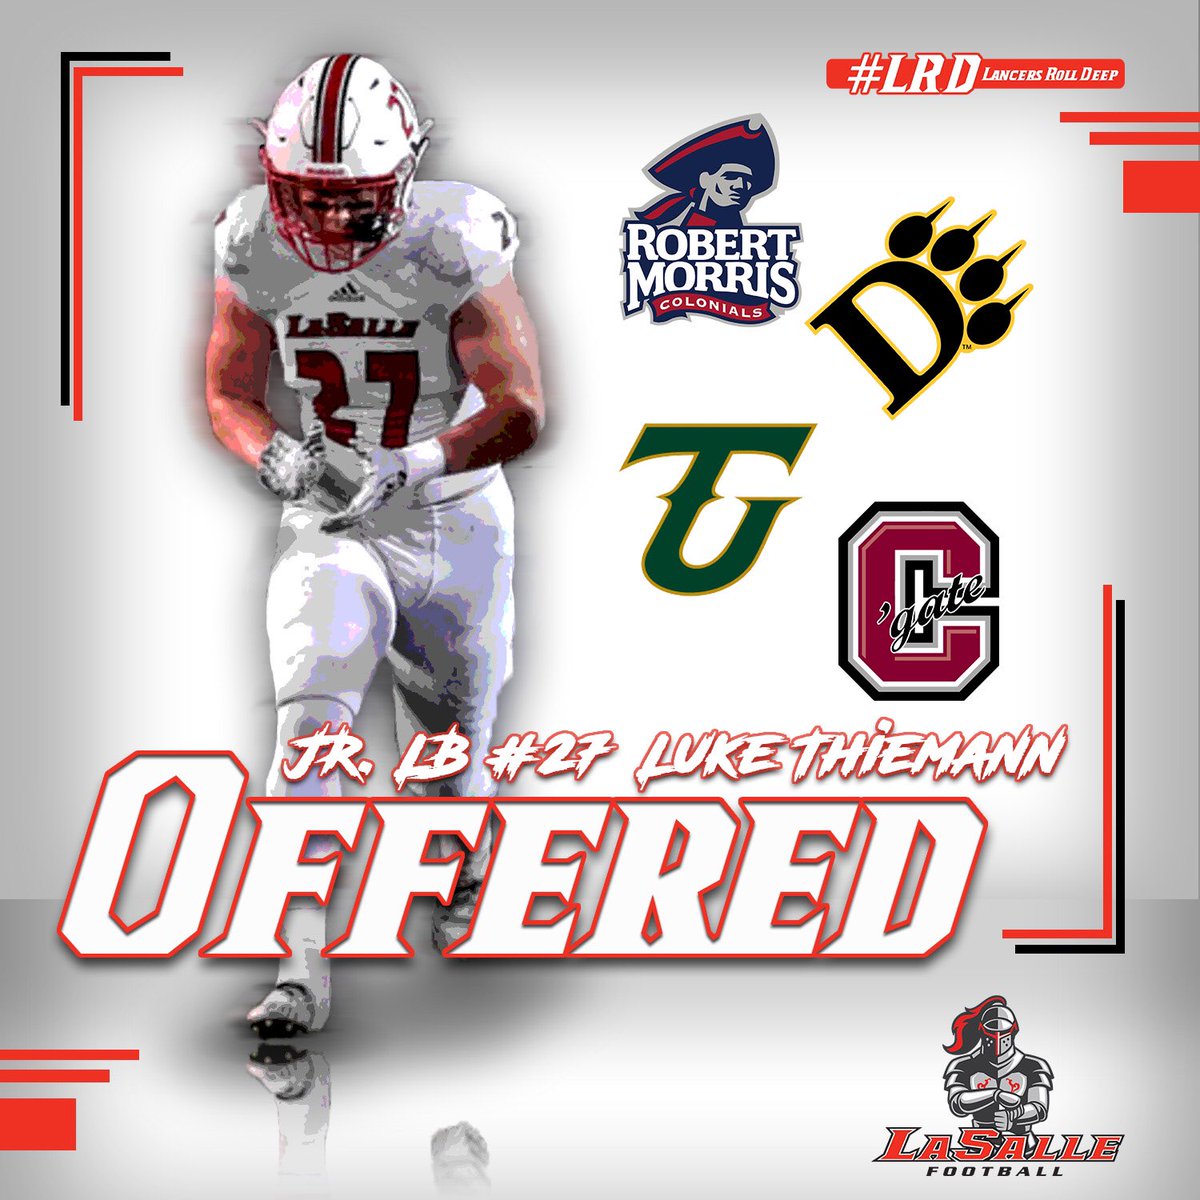 Congratulations to JR. LB @ltmann18 for receiving offers from @ColgateFB @TUDragonFB @OhioDominicanFB and @RMUFootball this past week! #LRD #GoGate #BringTheFire #GoPanthers #RMUFB